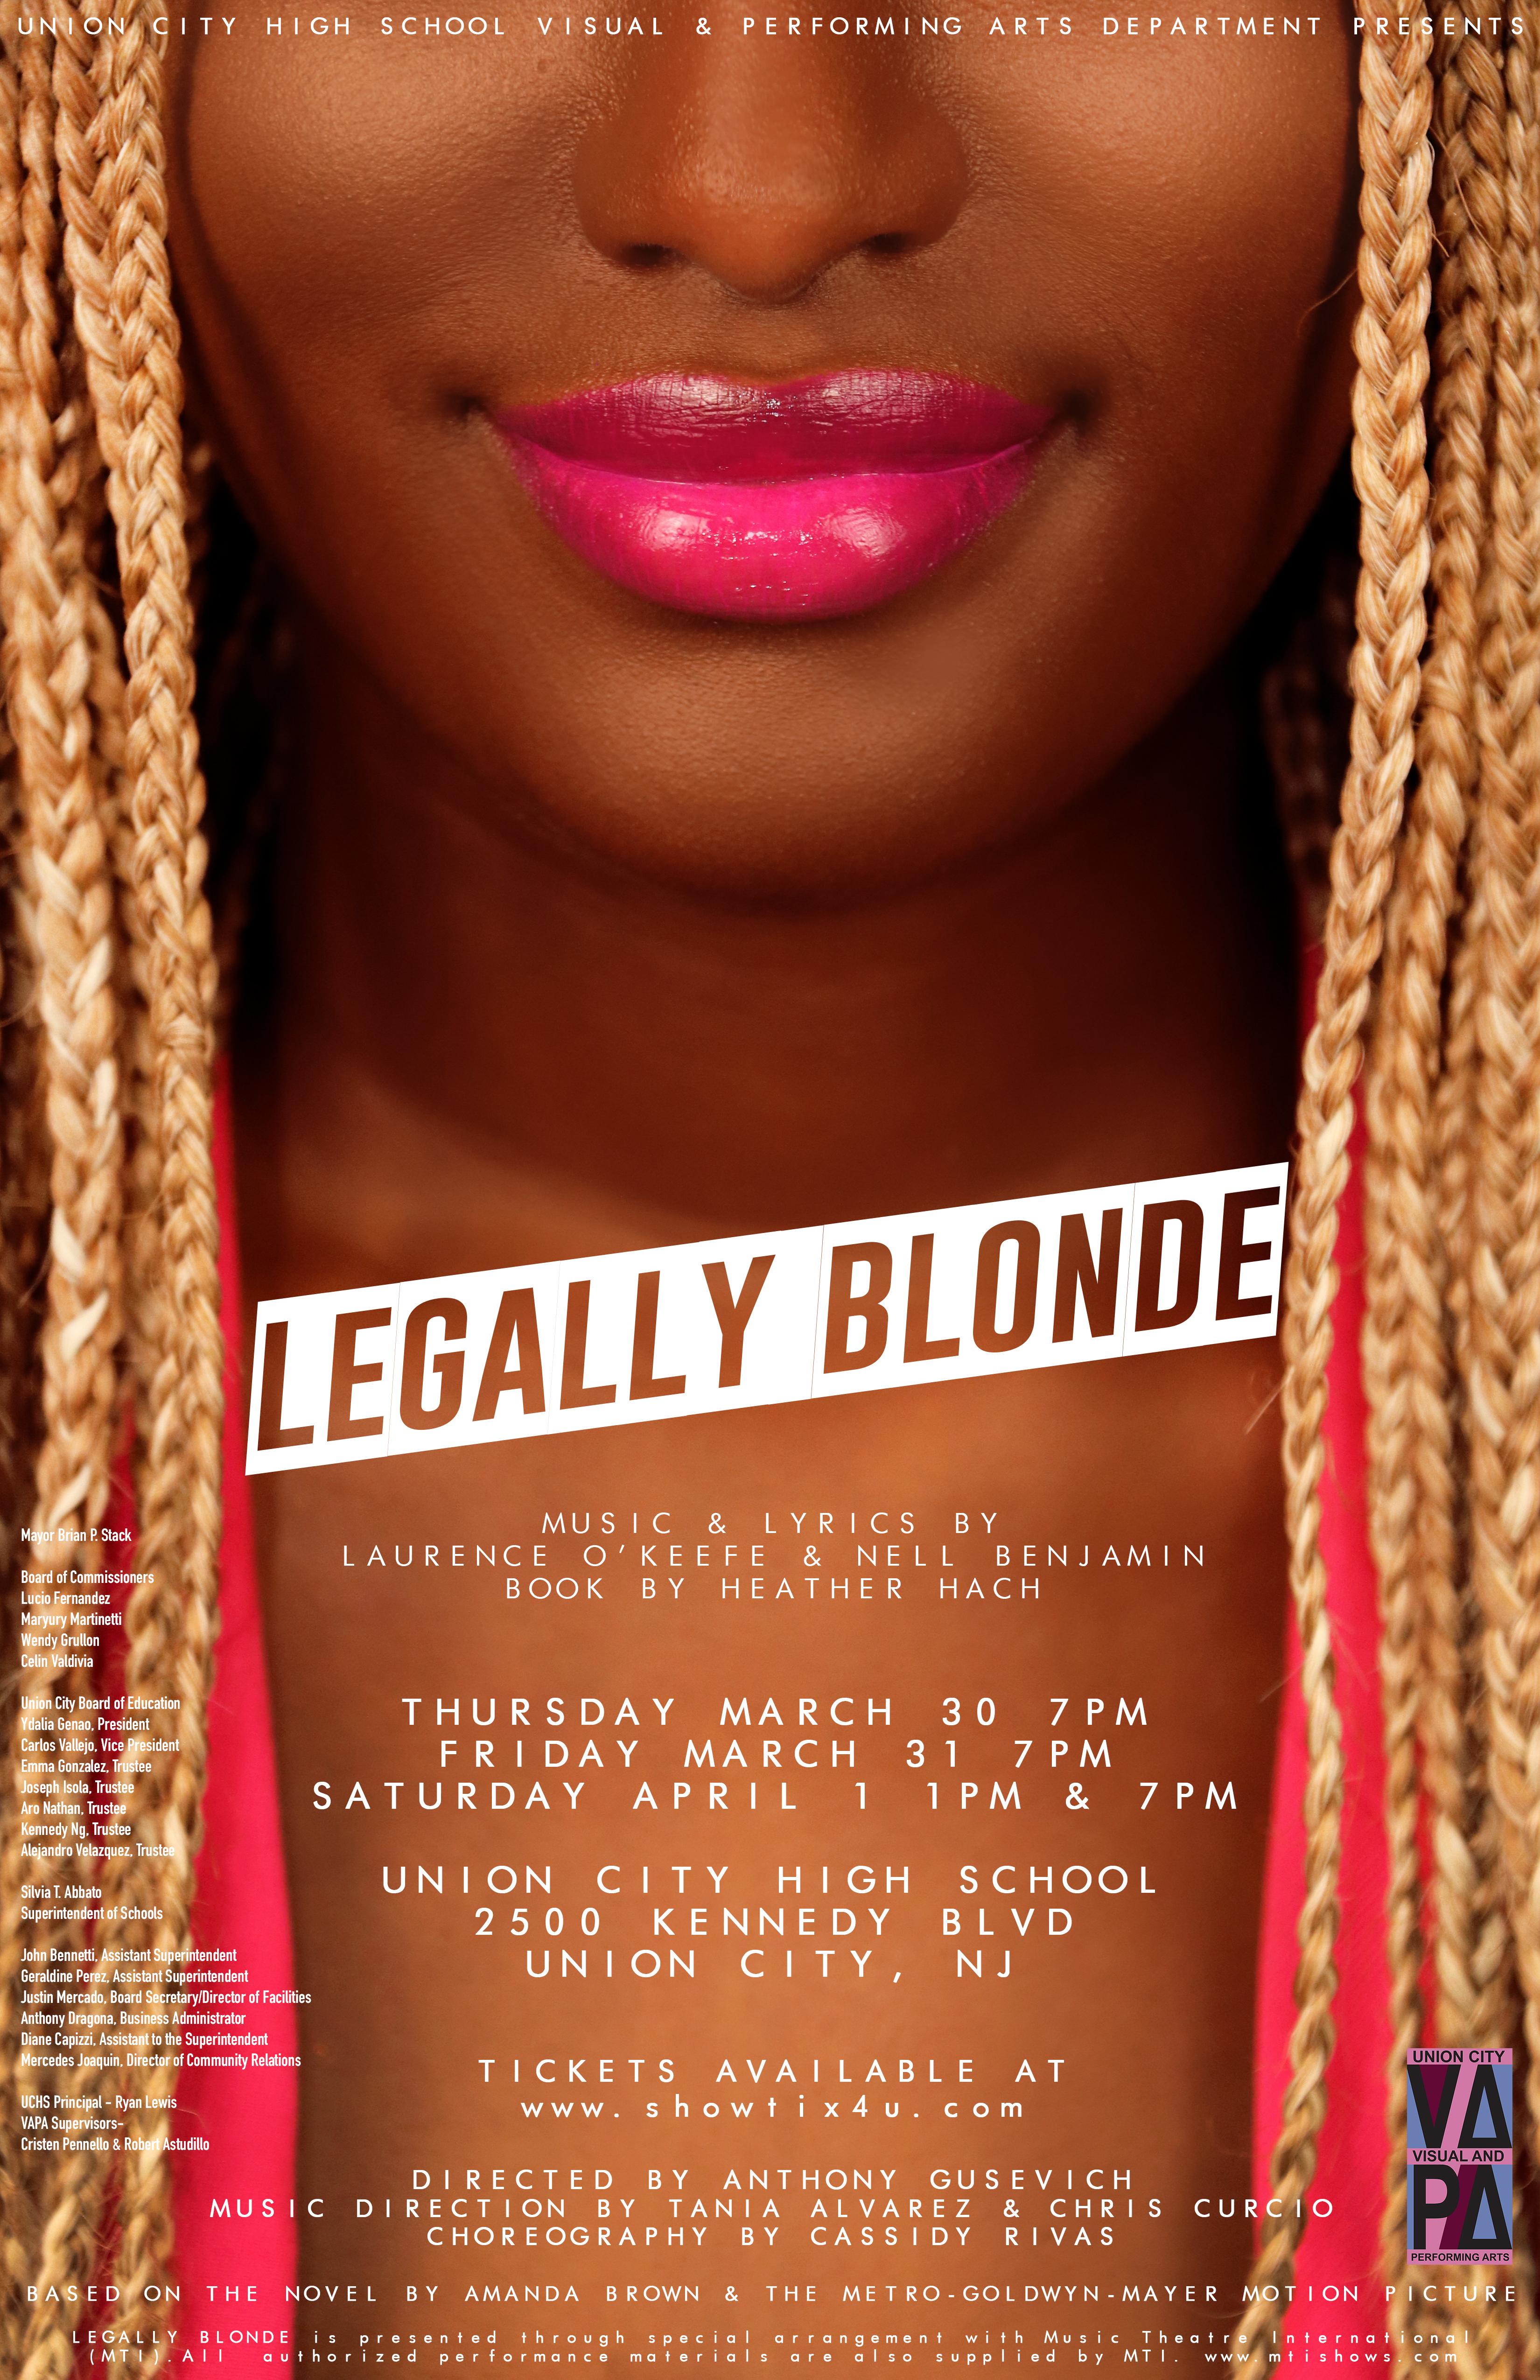 Legally Blonde is coming this month to Union City High School